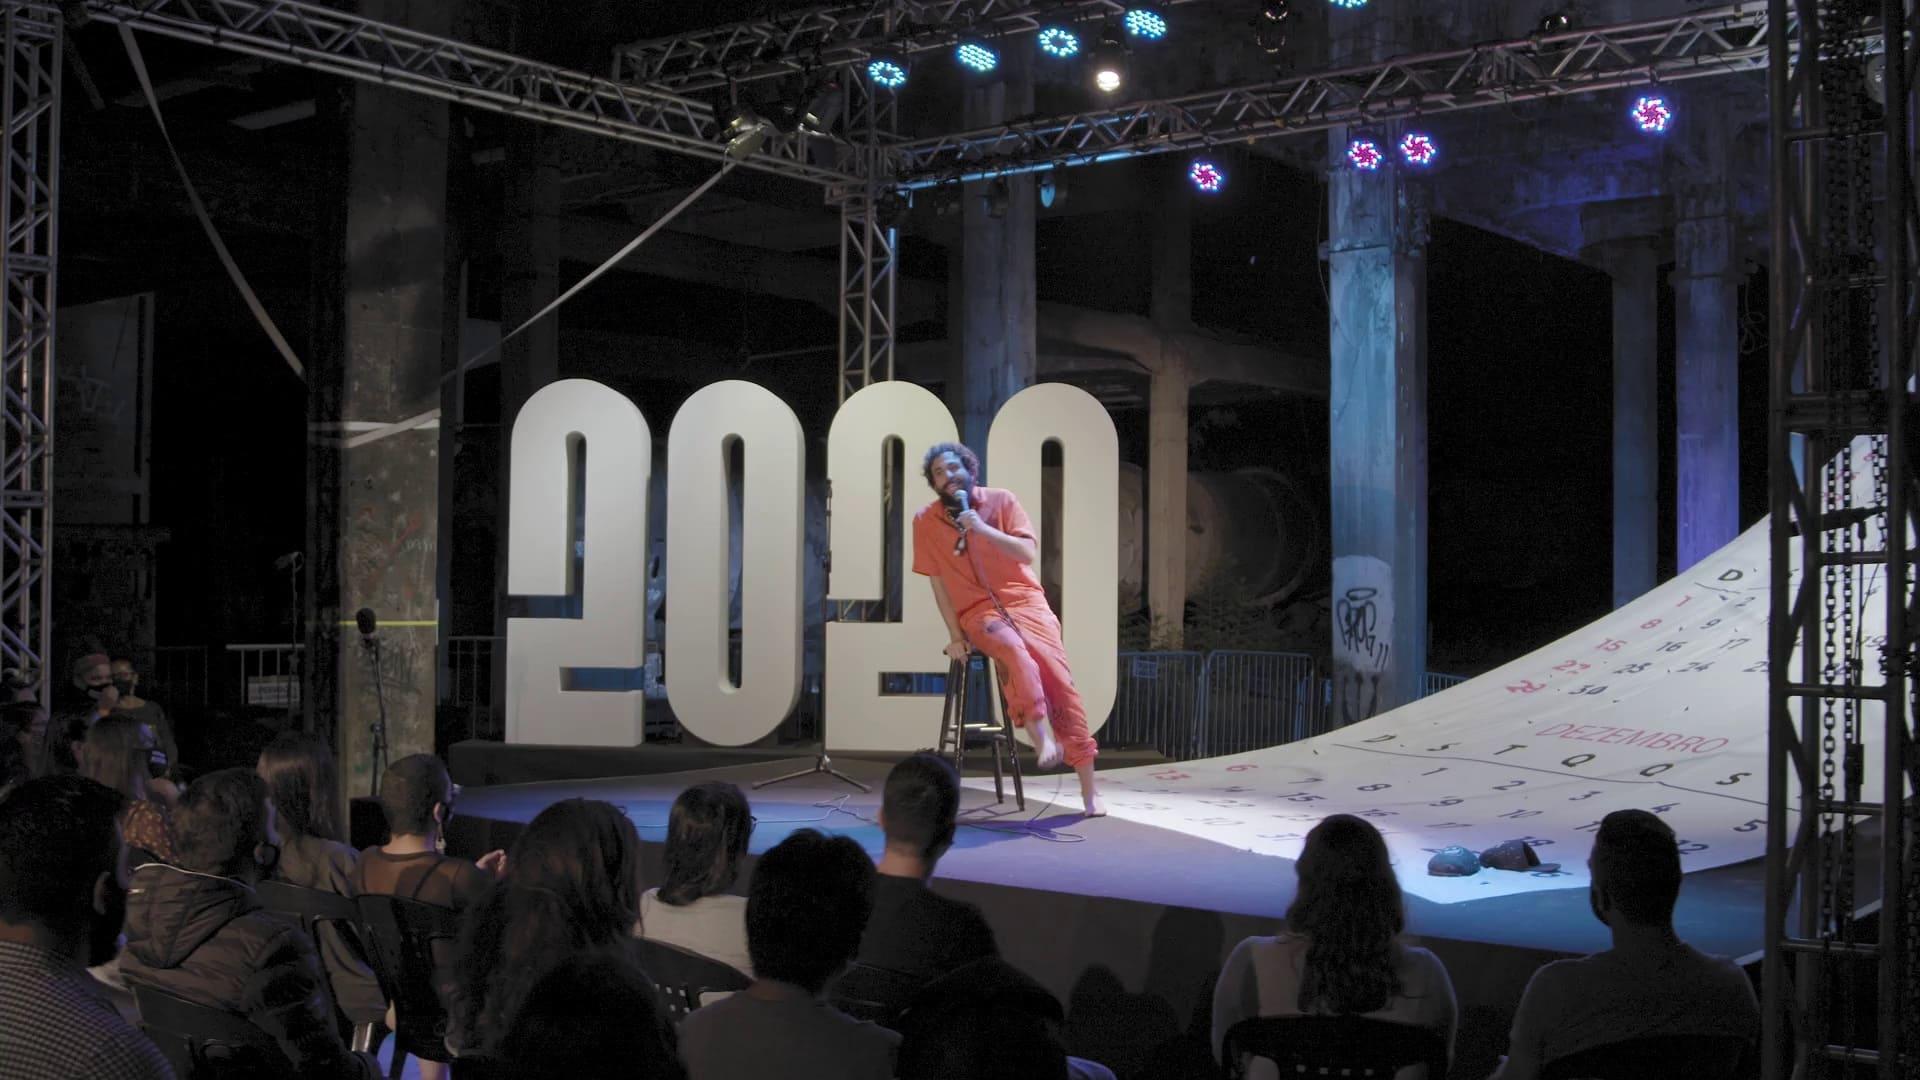 Murilo Couto: 2020 backdrop